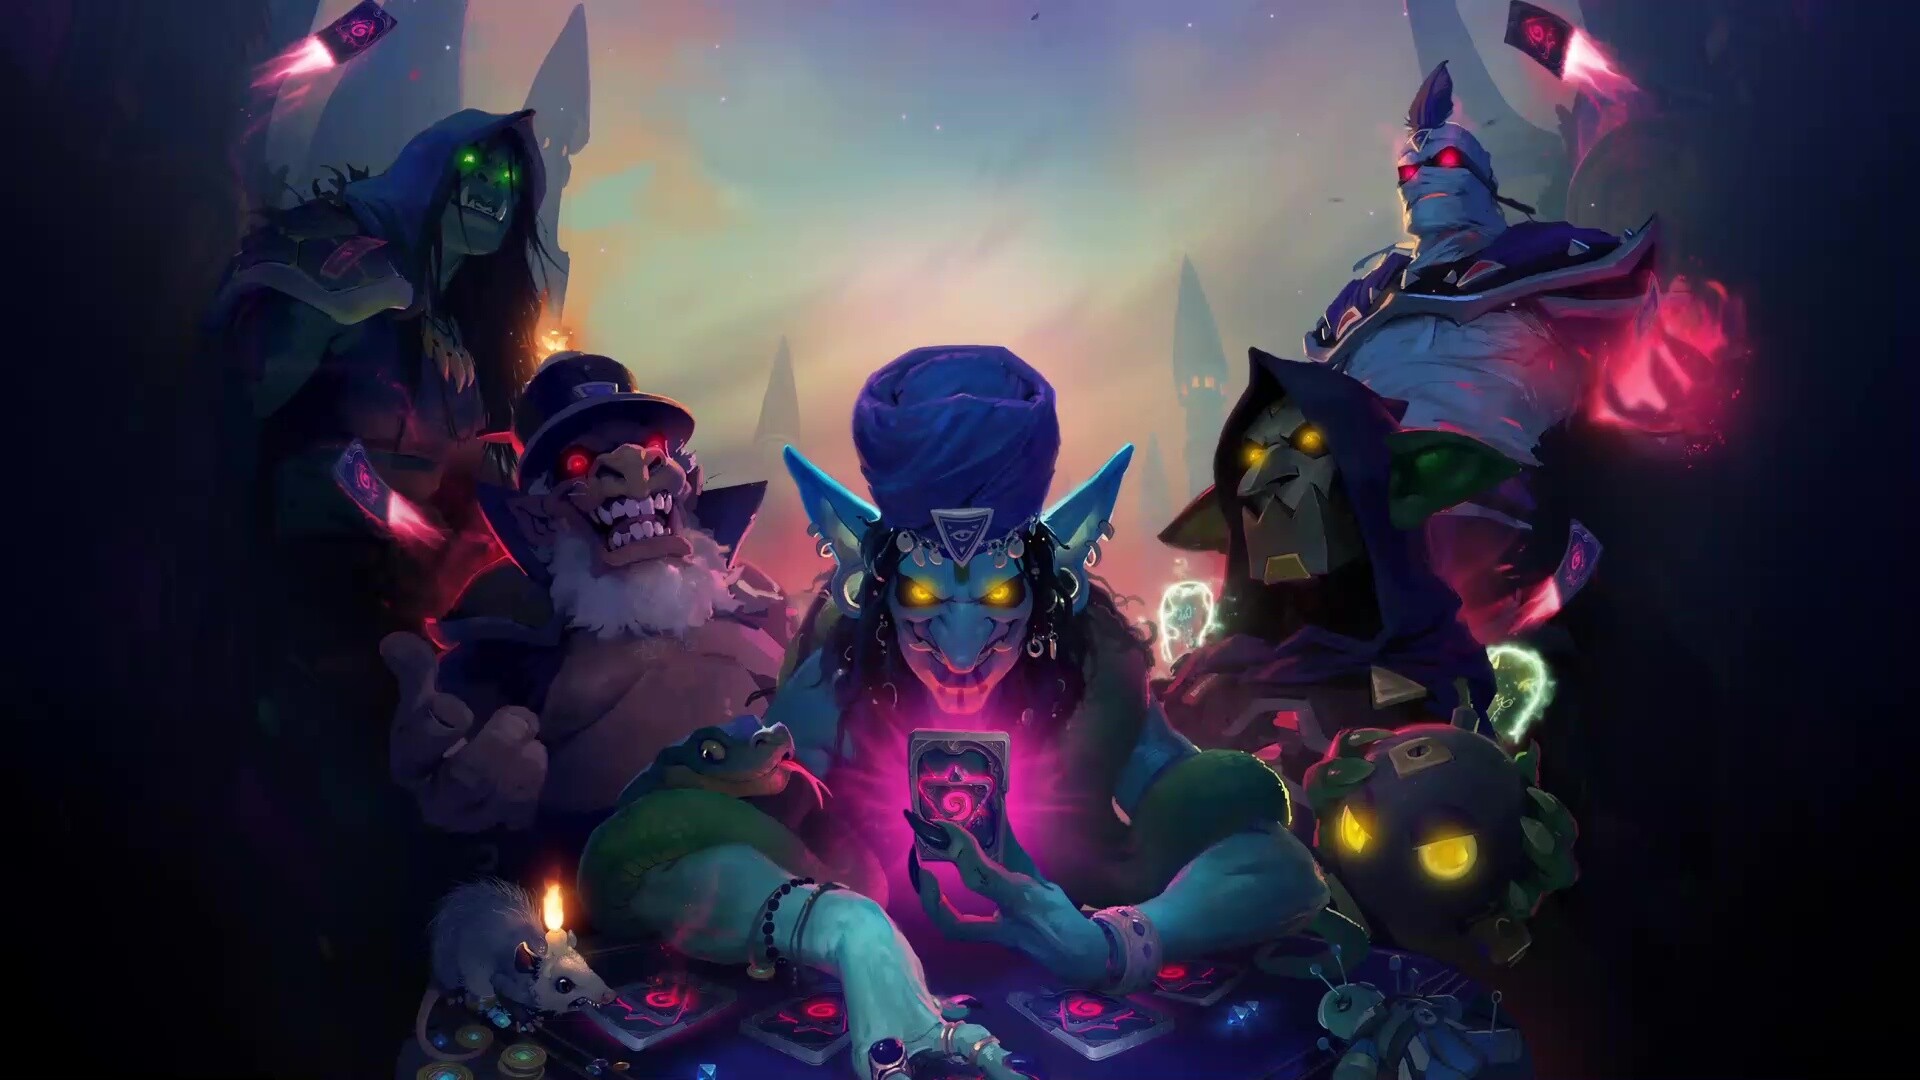 Rise of Shadows live wallpaper, Dynamic card animations, Immersive gaming experience, Hearthstone visuals, 1920x1080 Full HD Desktop